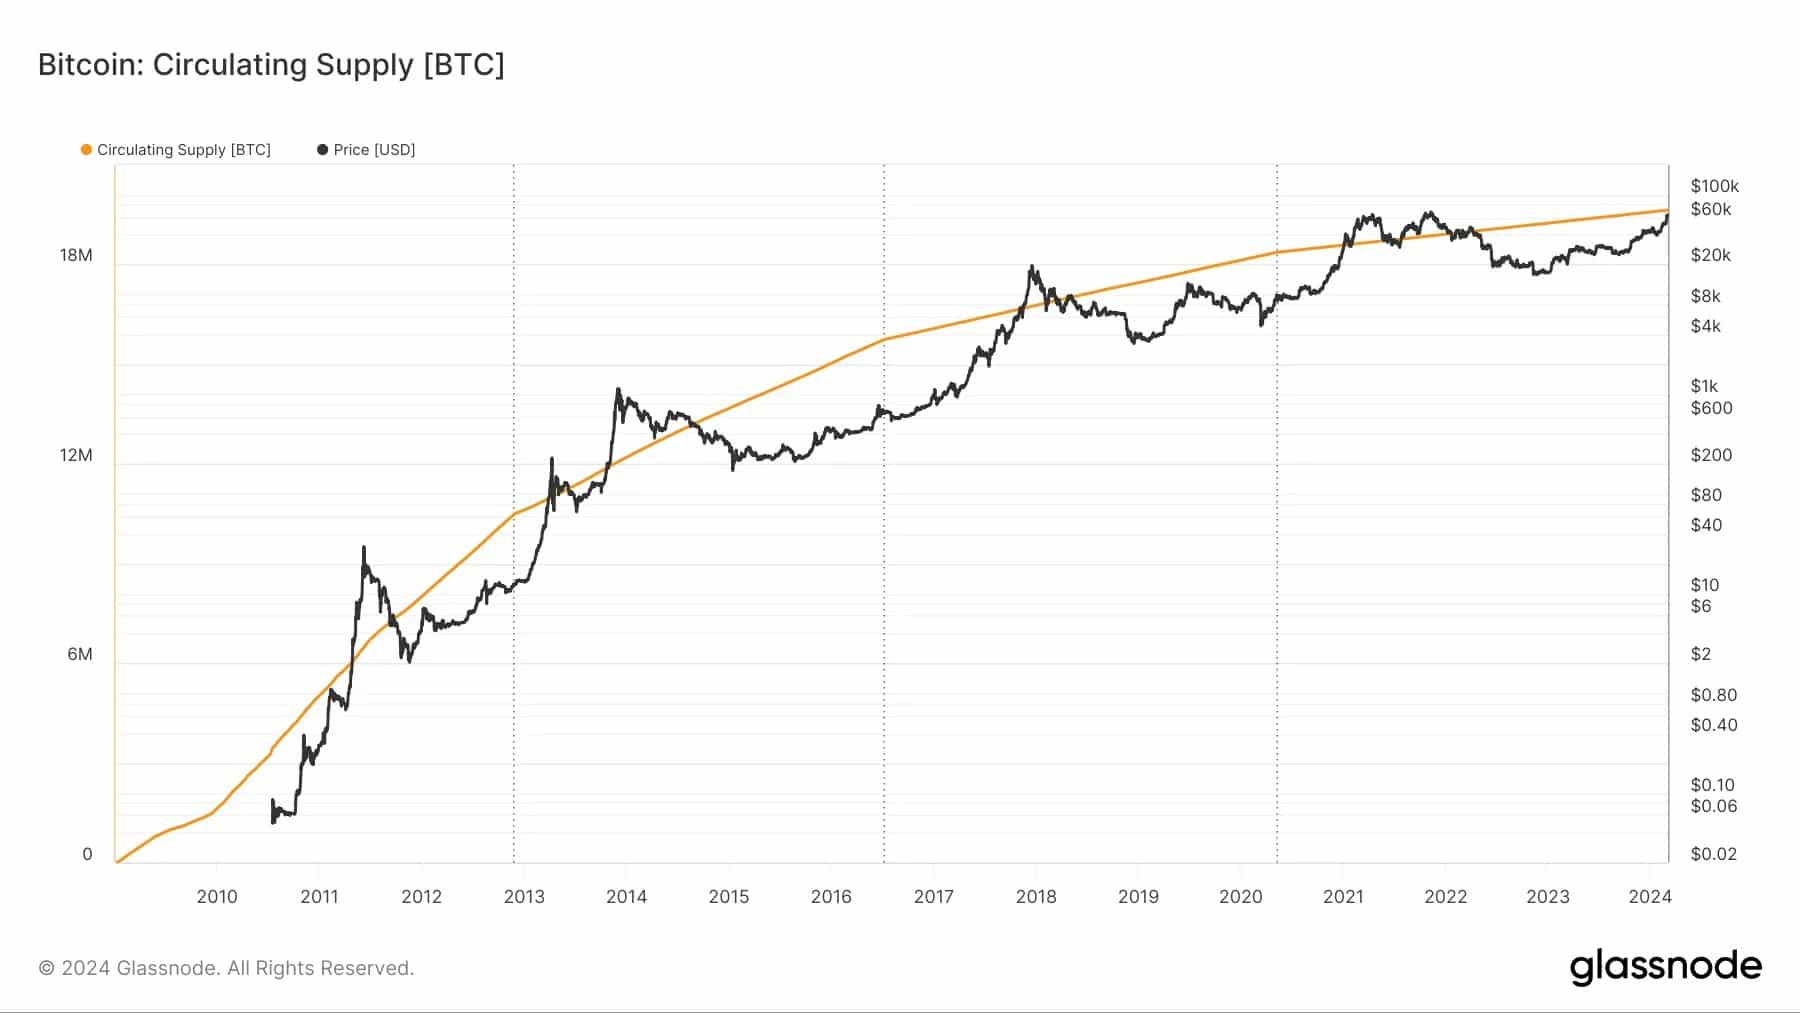 Evolution of the number of BTC in circulation since the launch of Bitcoin